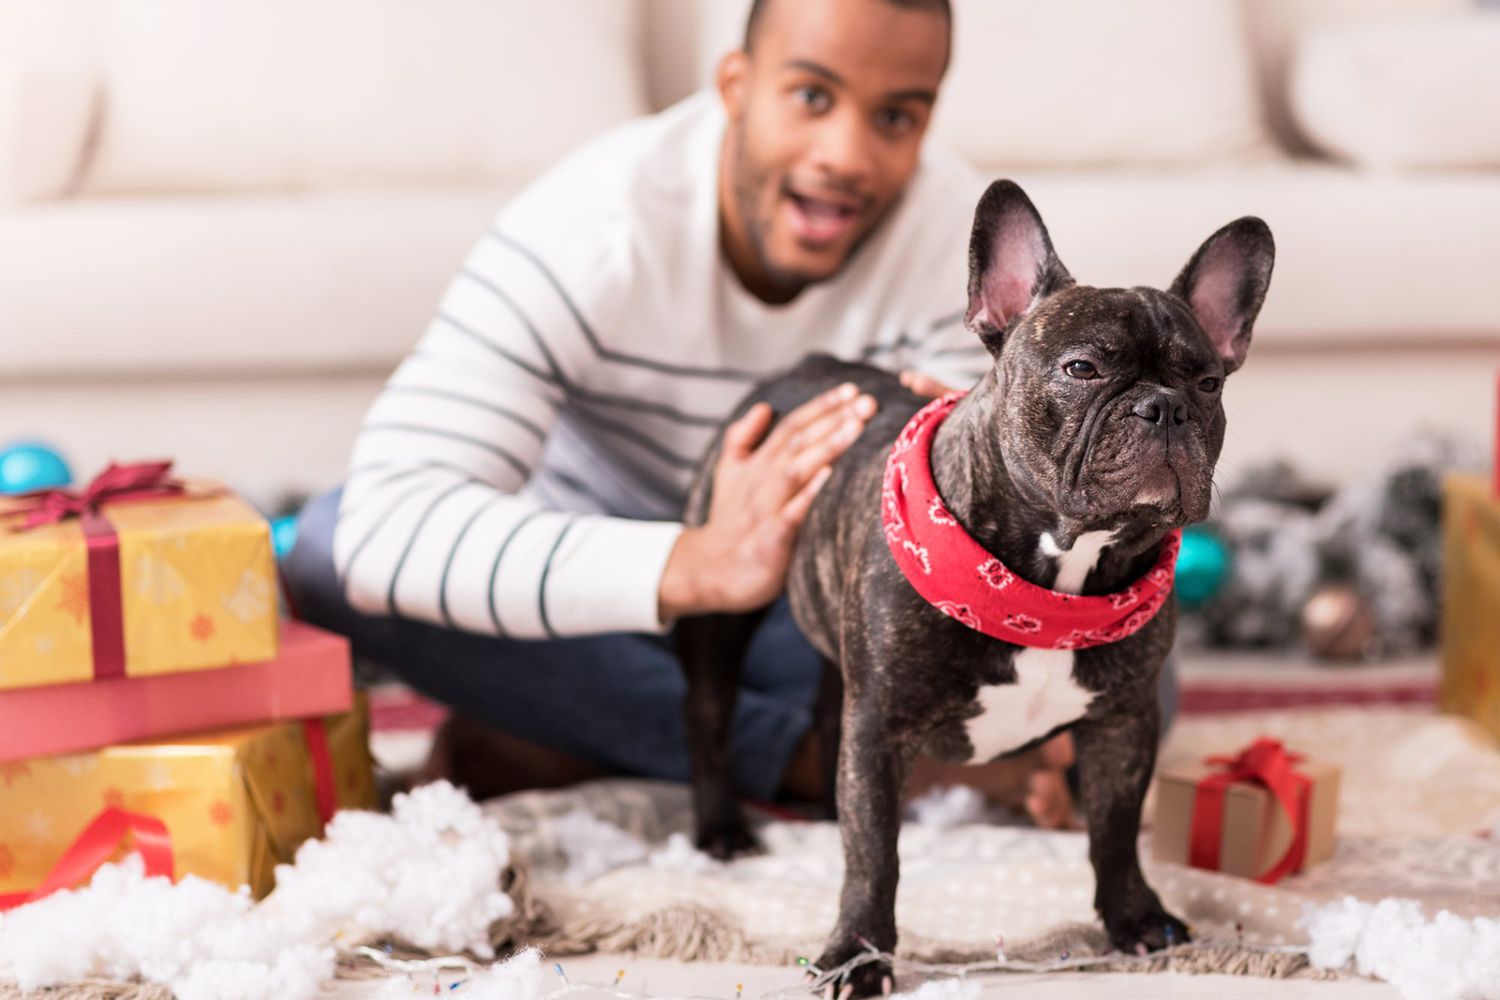 How Many Gifts Should You Buy Your Pet For the Holidays? | Daily Paws